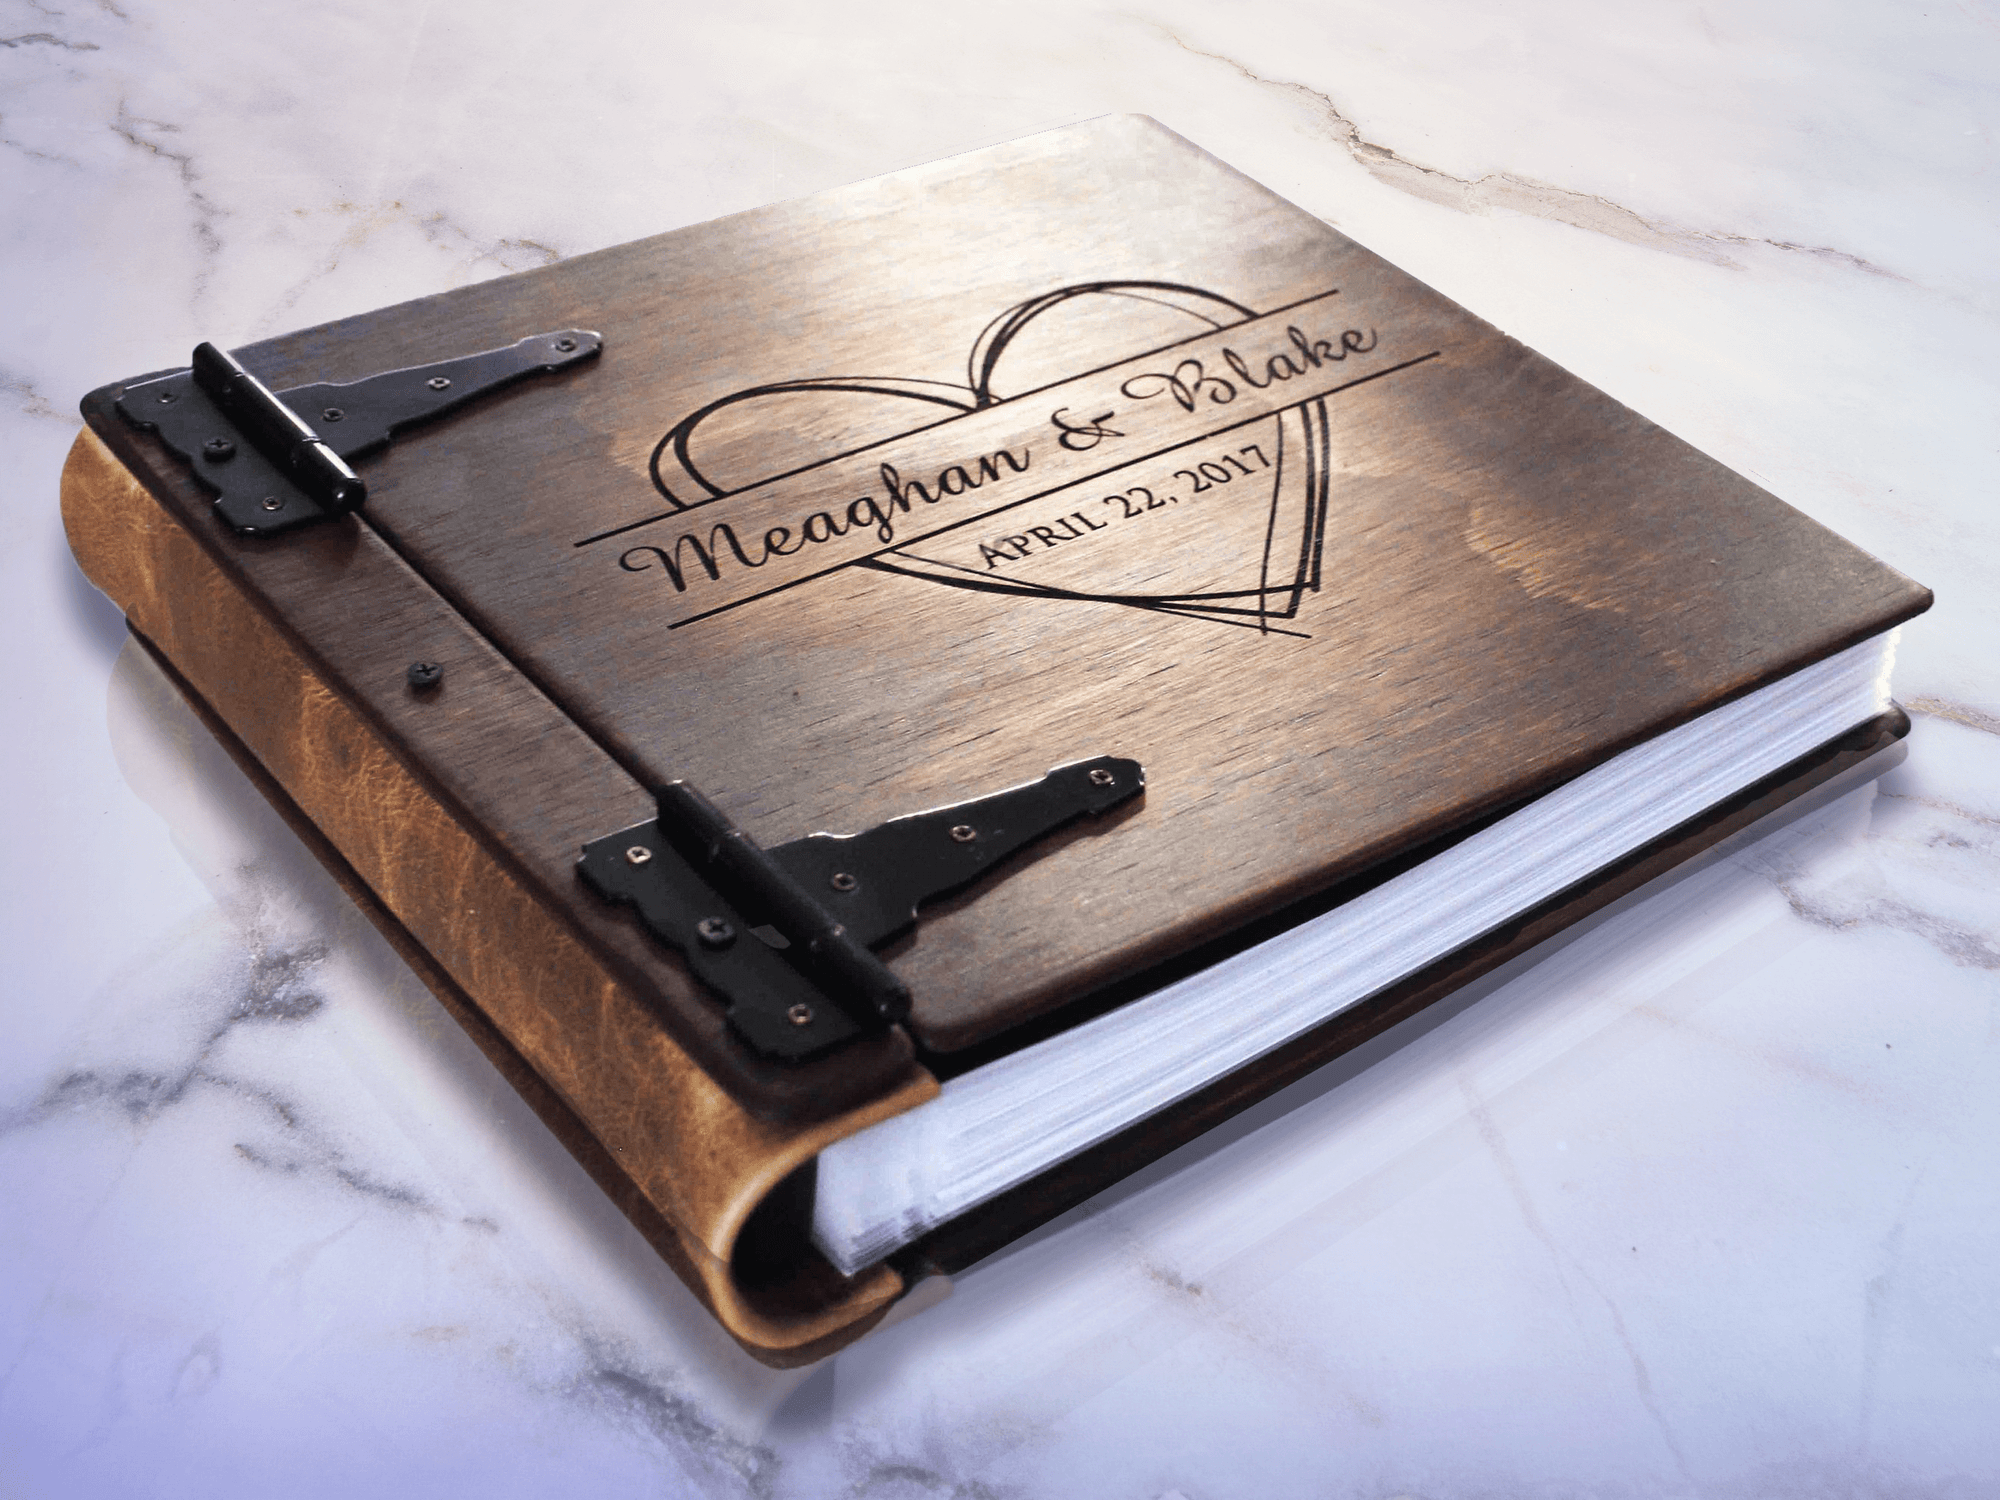 A custom personalized wedding guest book created by Rustic Engravings | A unique and timeless way to remember your wedding day. The perfect keepsake gift to cherish for years to come. Make your wedding day unforgettable with our custom one-of-a-kind woode